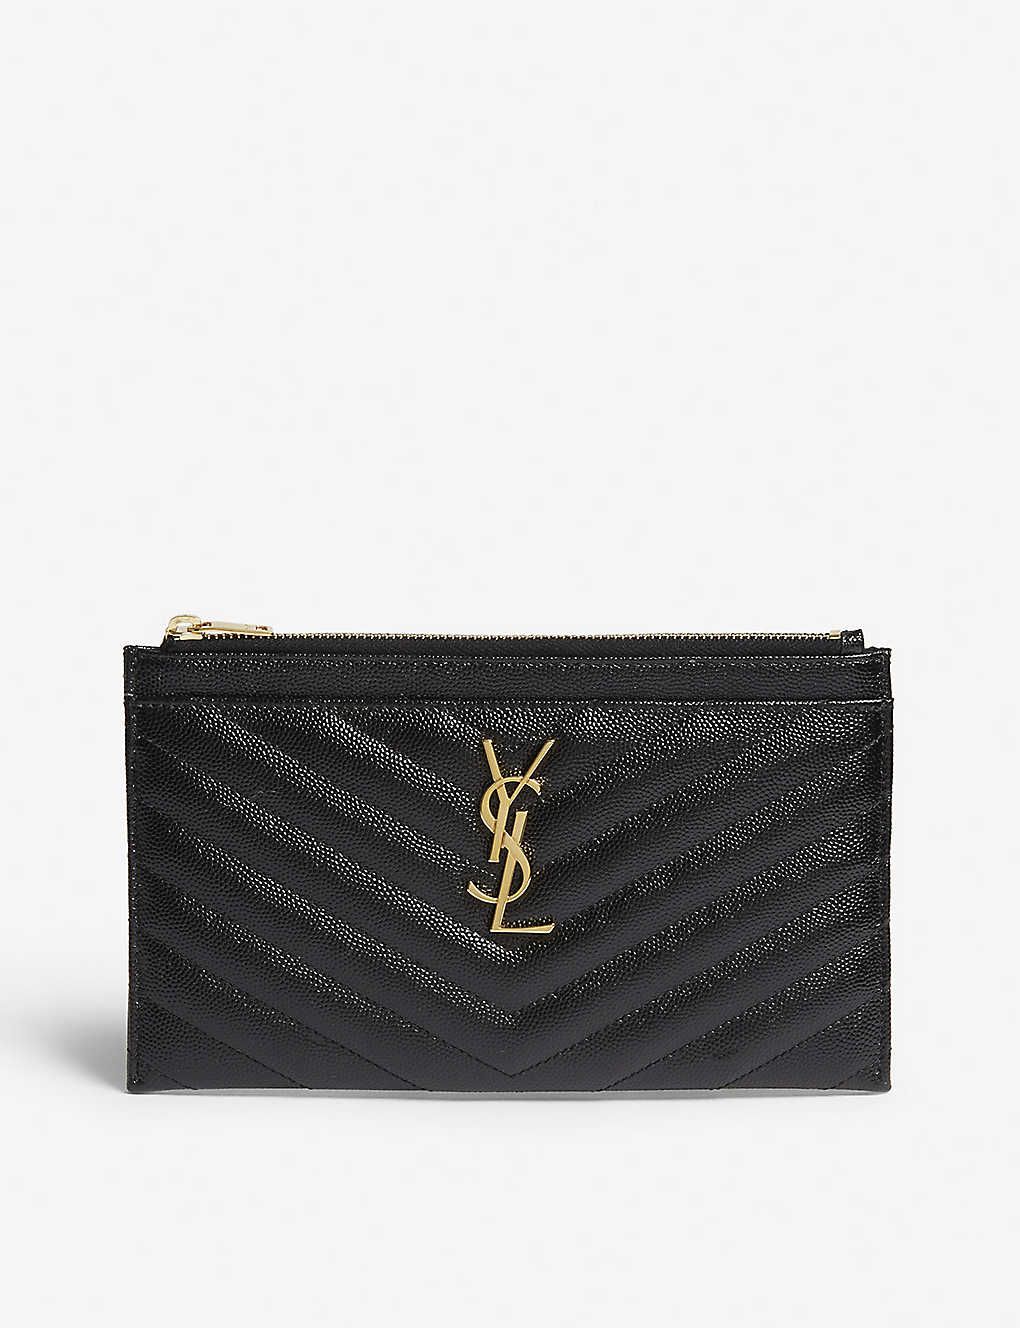 Monogram quilted leather pouch | Selfridges